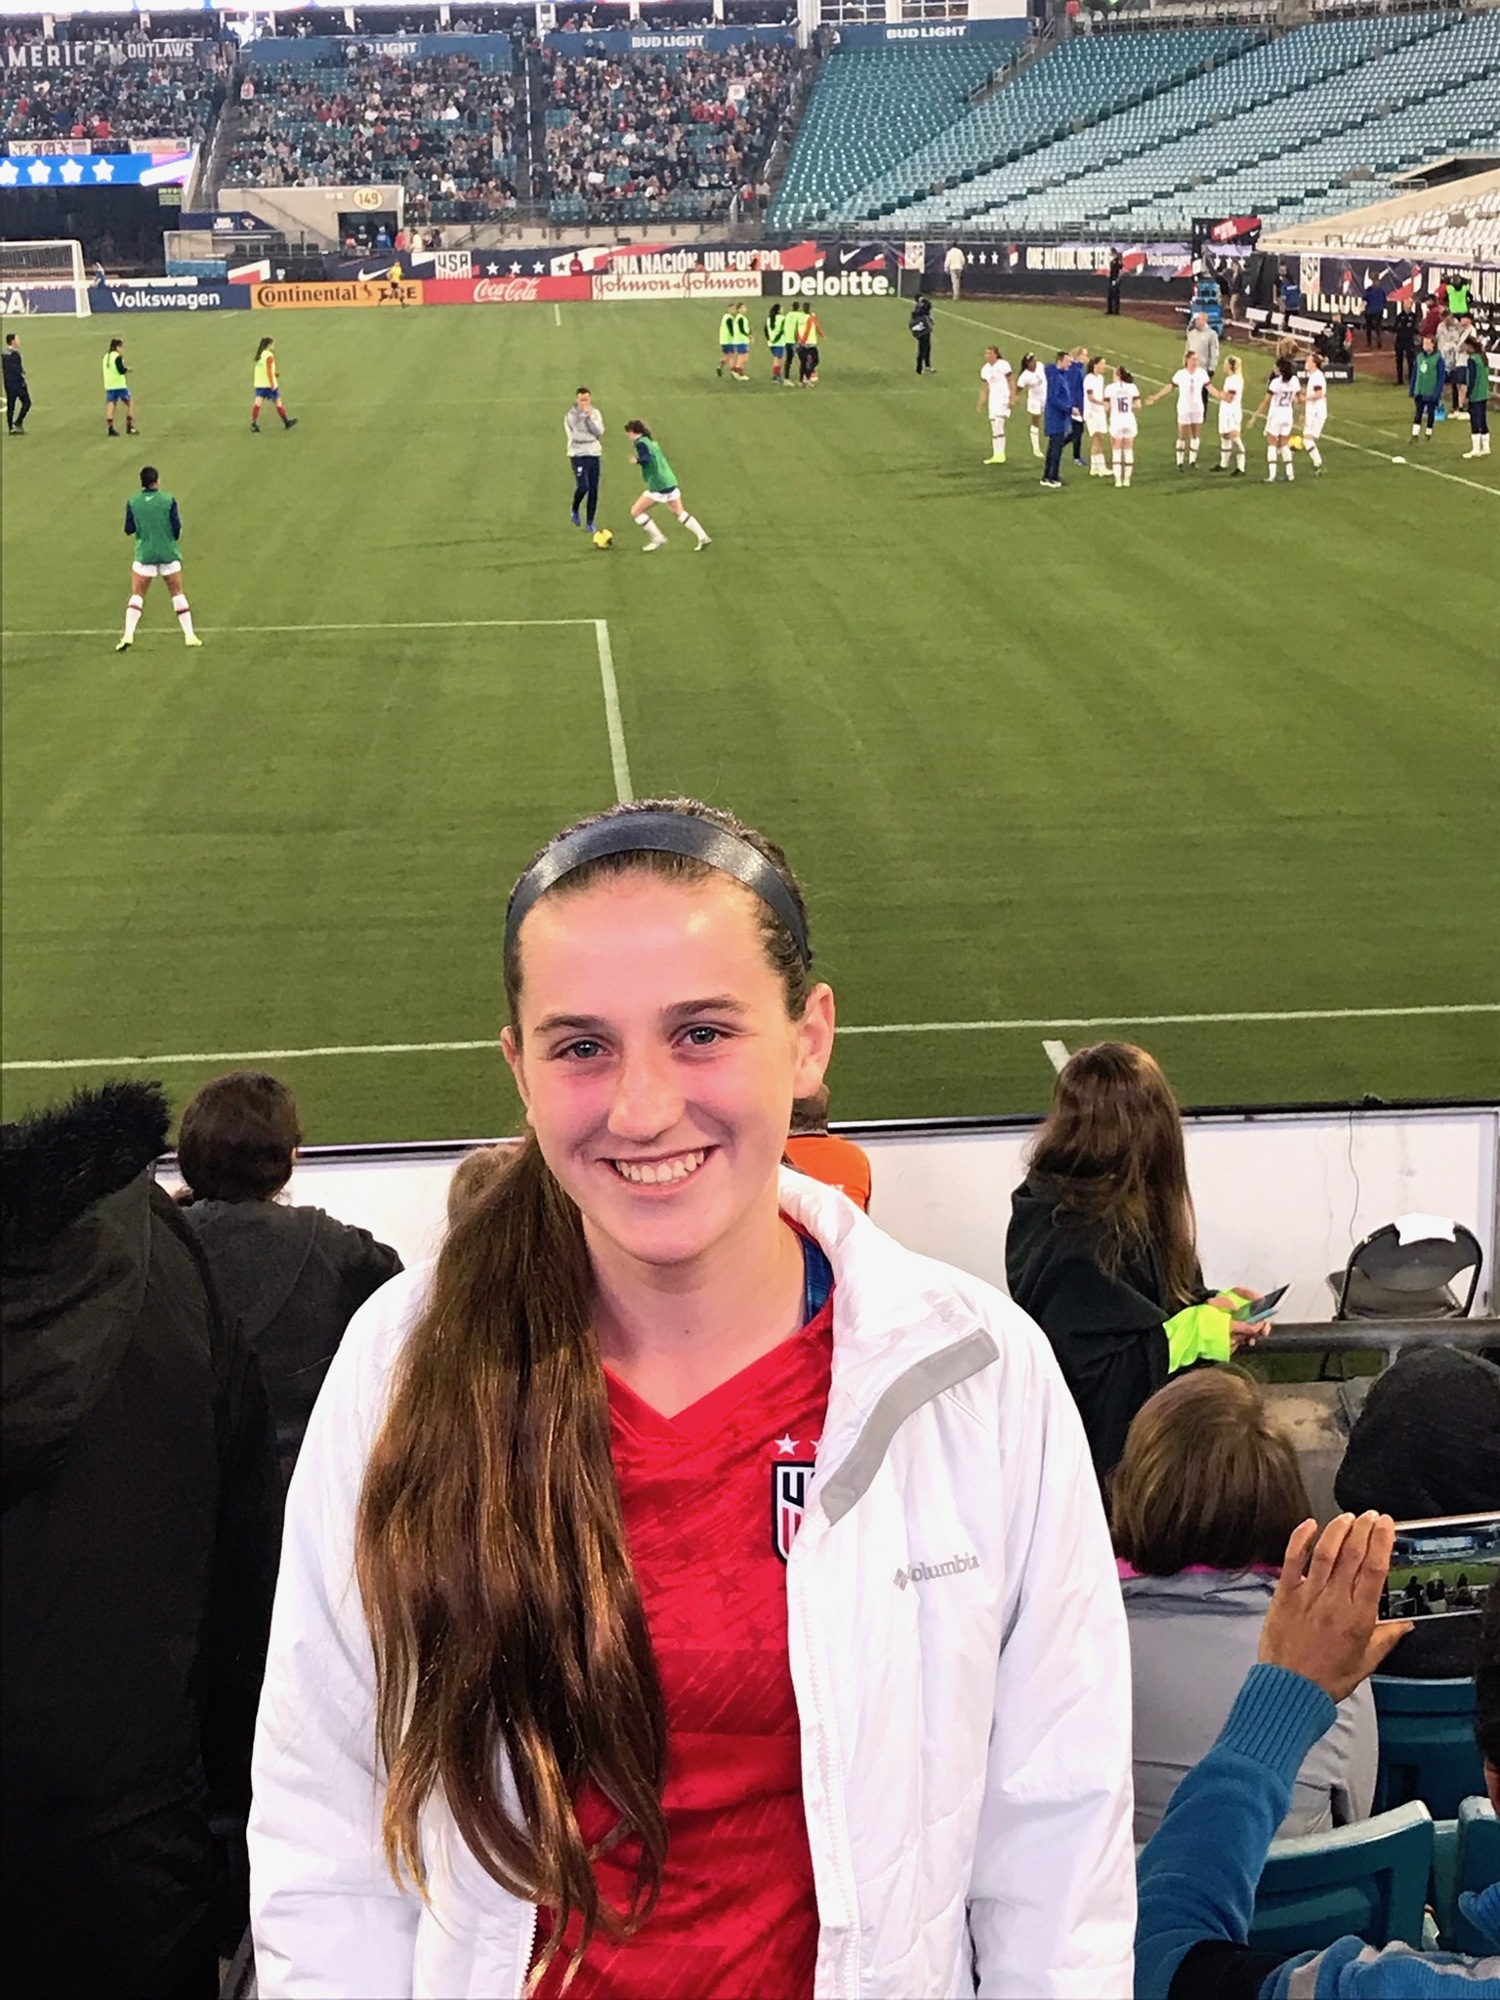 Hailey Tucker at a United States Women’s National Team soccer match. Courtesy photo